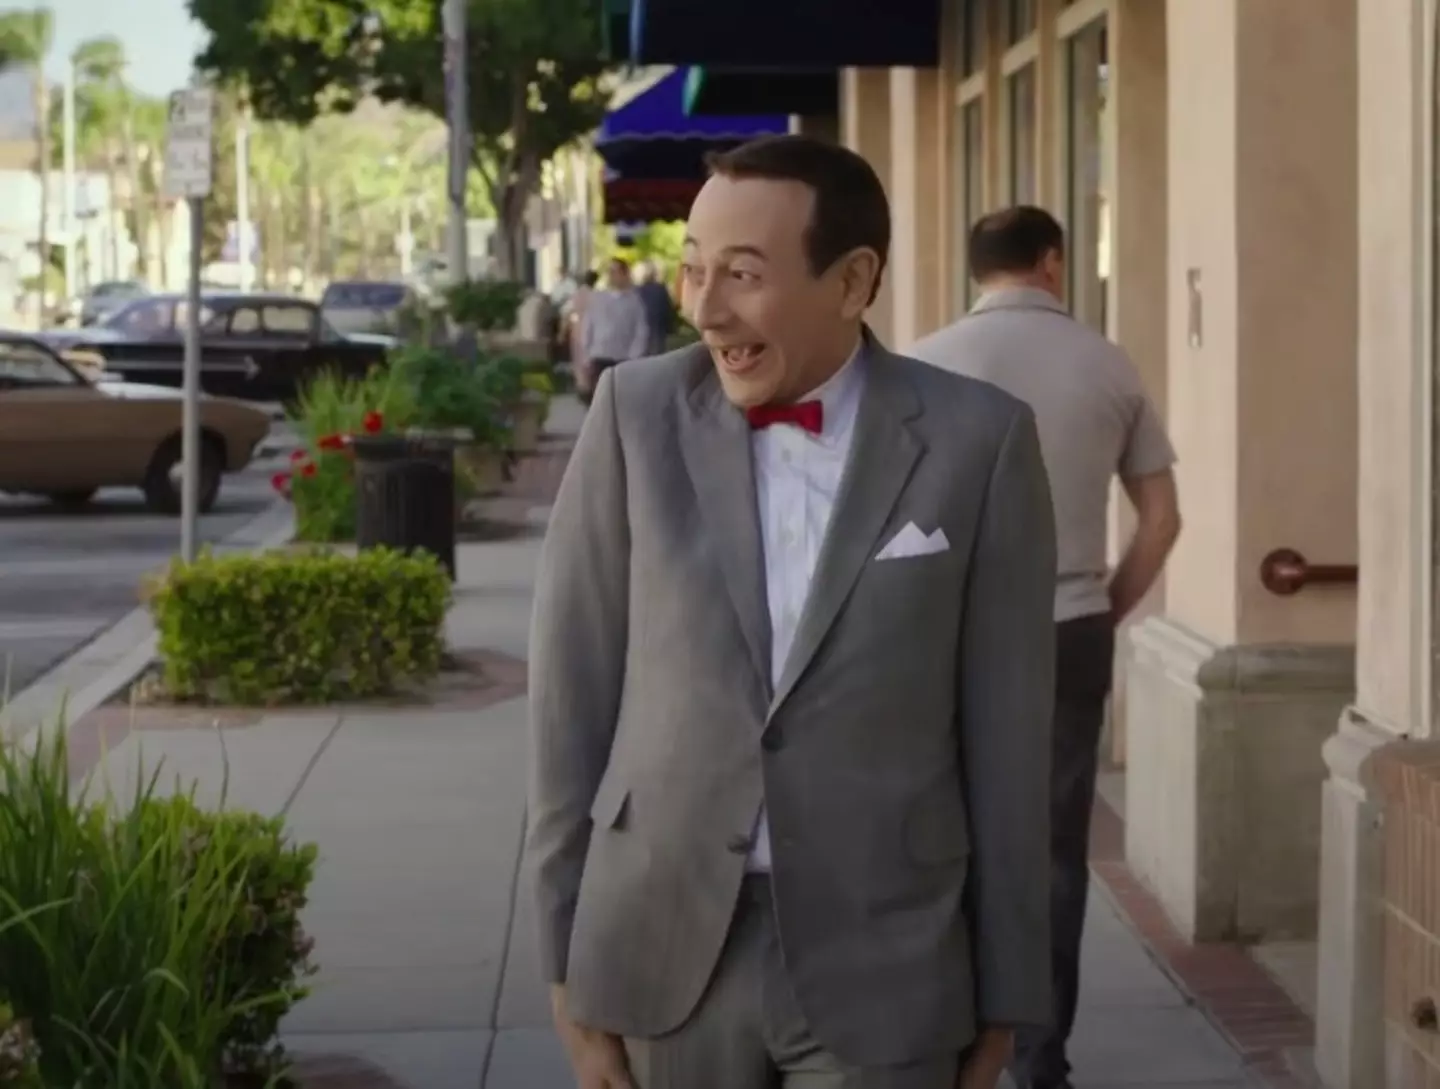 Paul Reubens passed away at the age of 70.